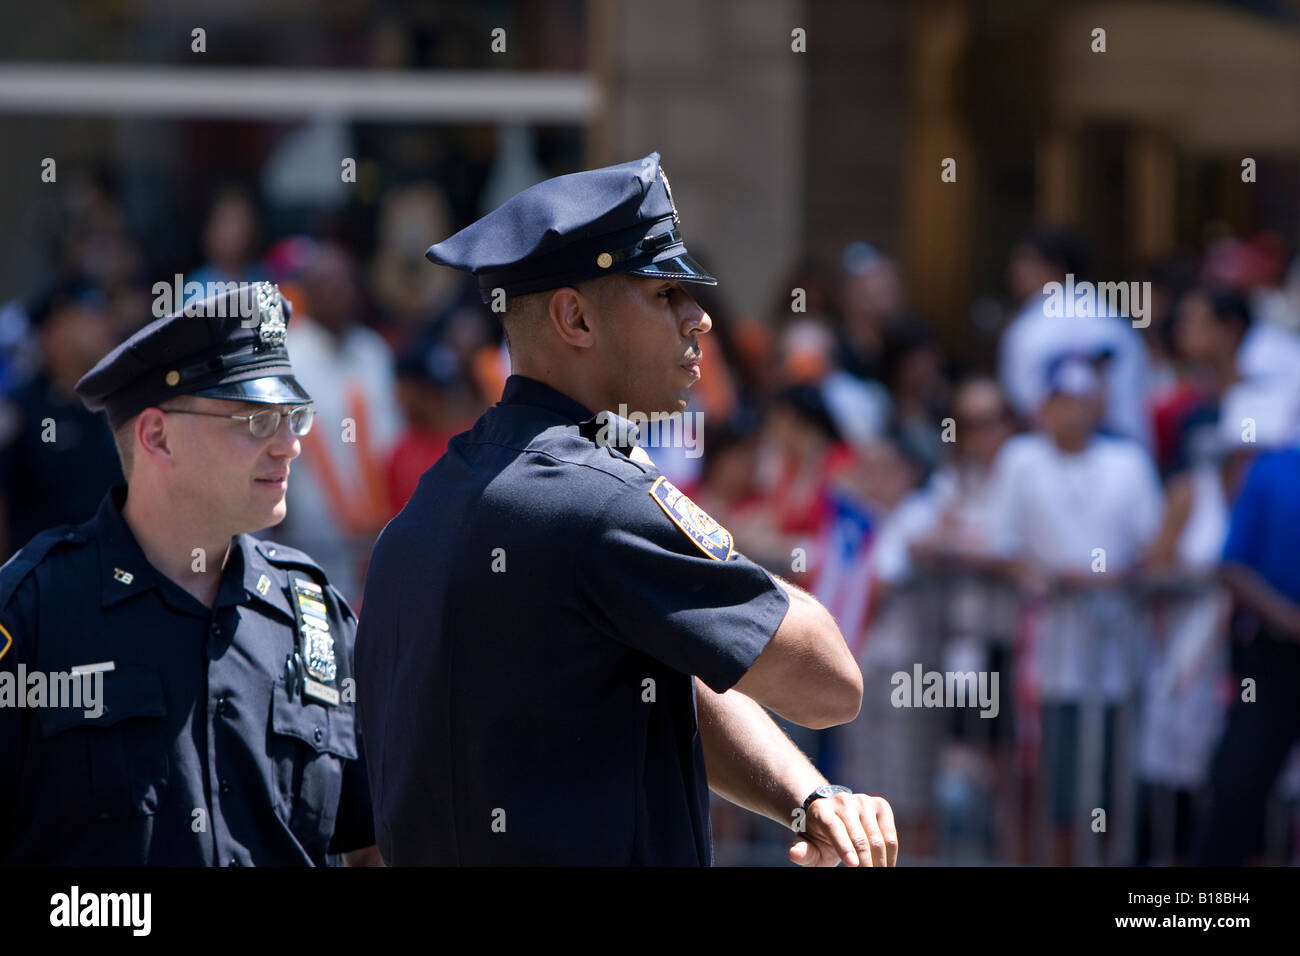 Zwei NYPD Offiziere Wache an der 2008 Puerto Rican Day Parade in New York City. Stockfoto